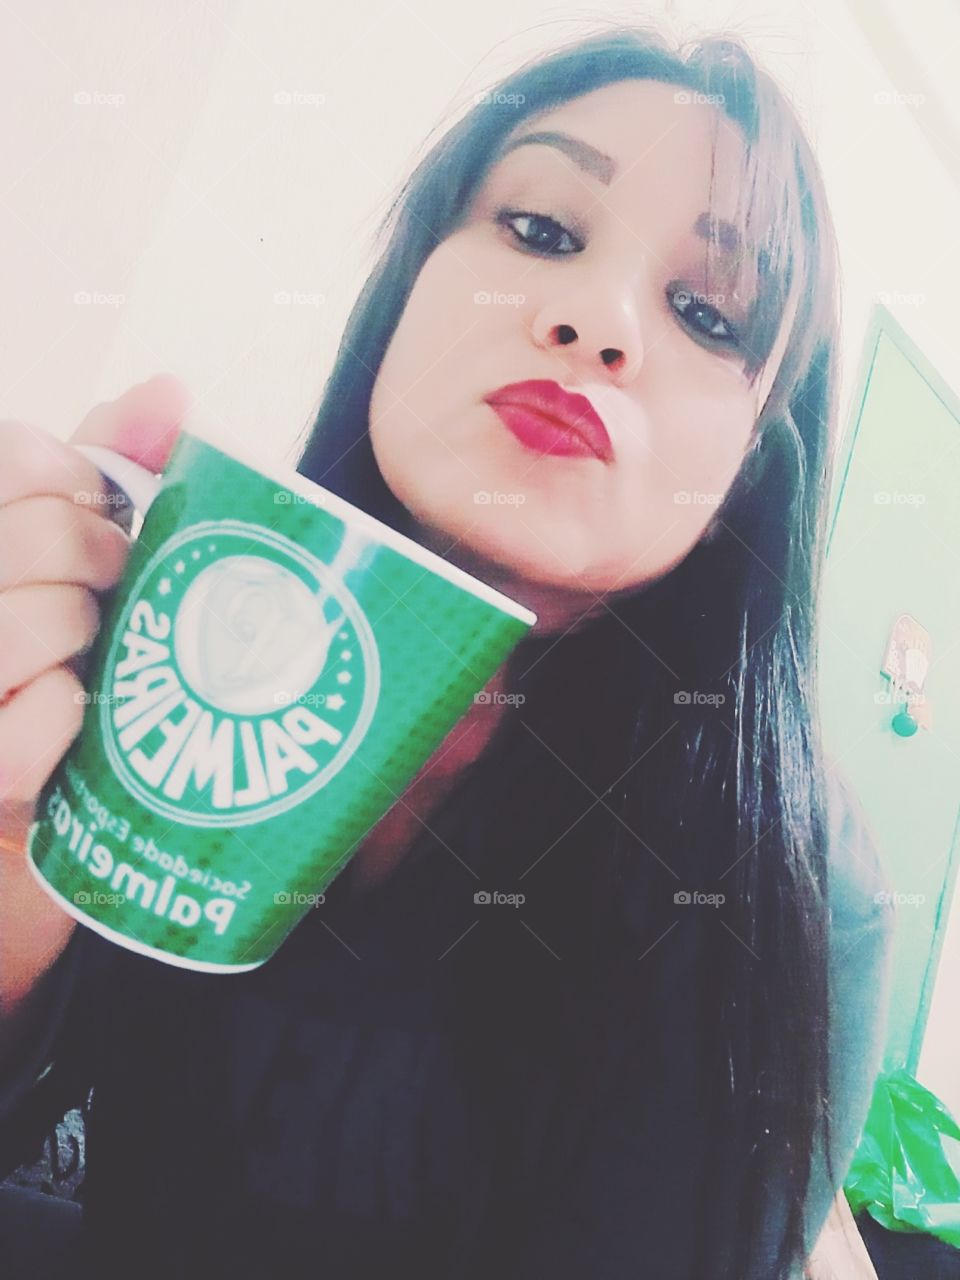 Palmeiras, Green and White is my HEART 💚⚪💚